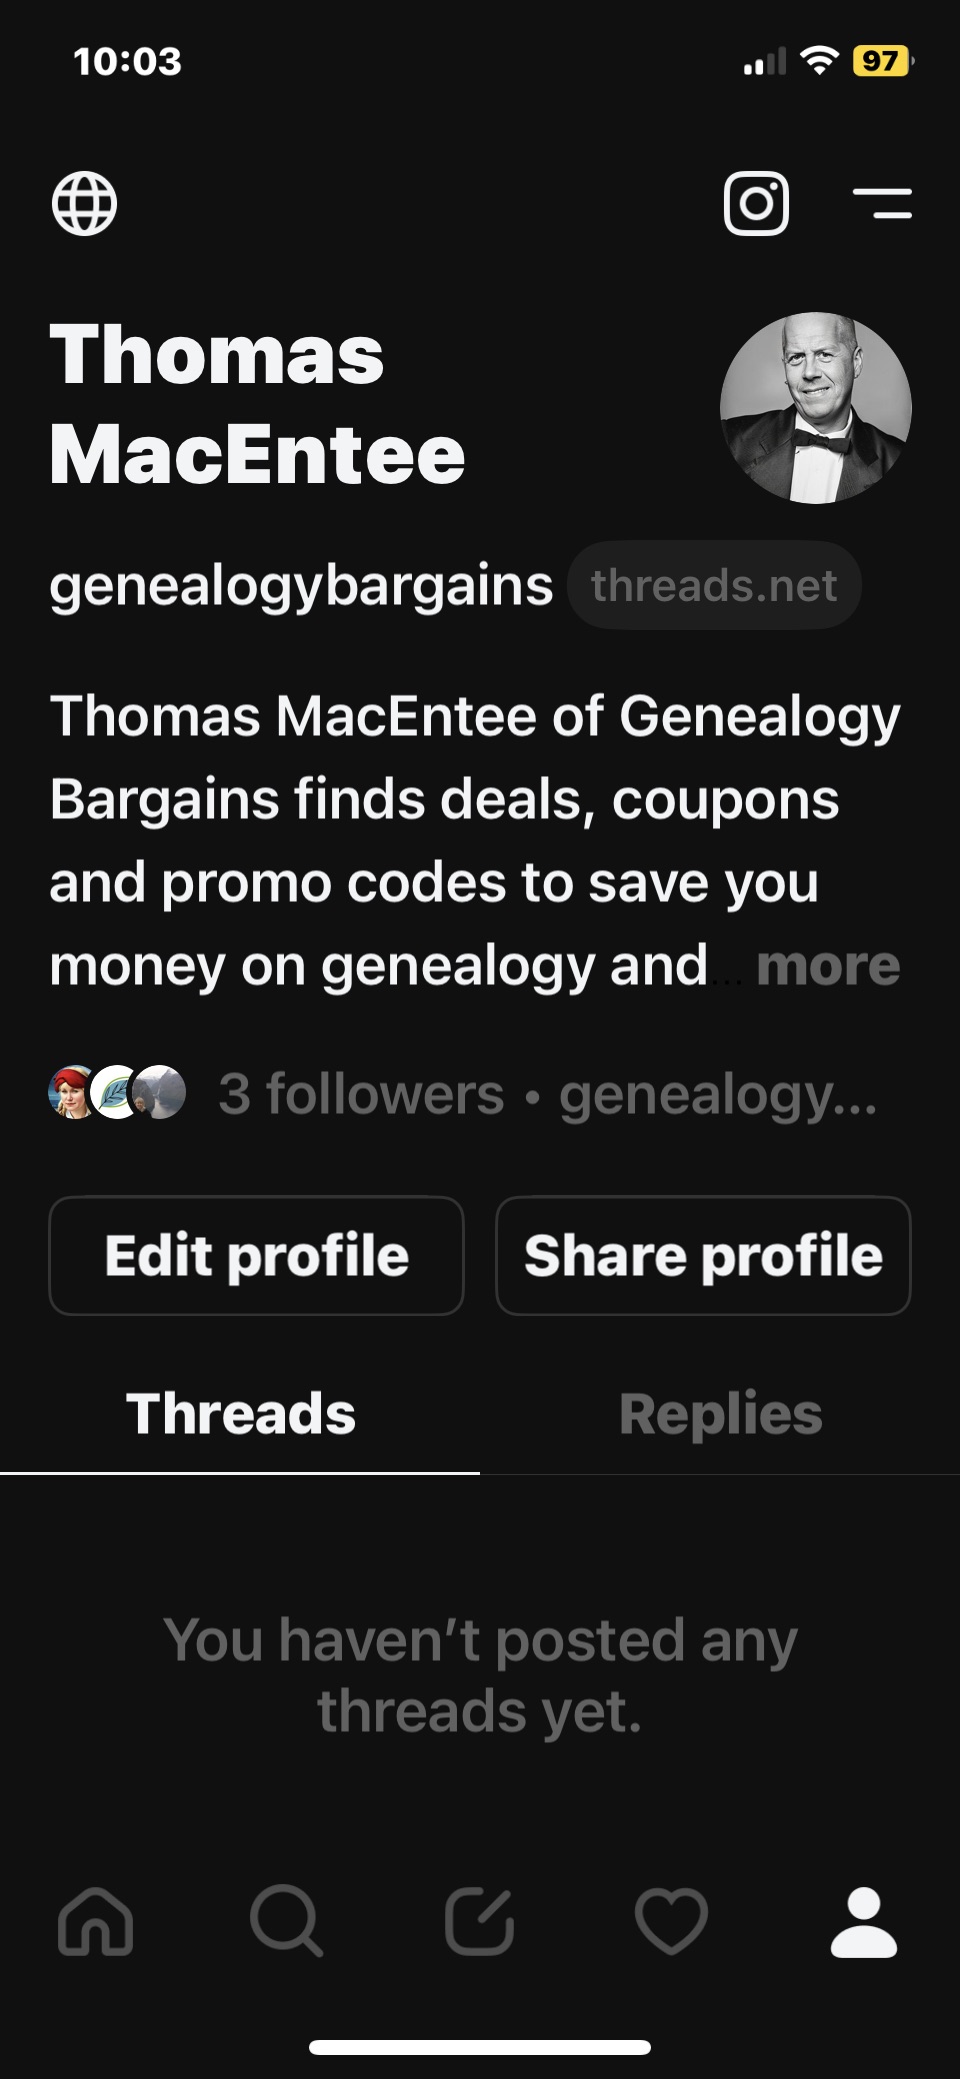 Genealogy expert Thomas MacEntee of GenealogyBargains.com helps you understand the new text-based social media app Threads from Meta, the parent company of Facebook. 